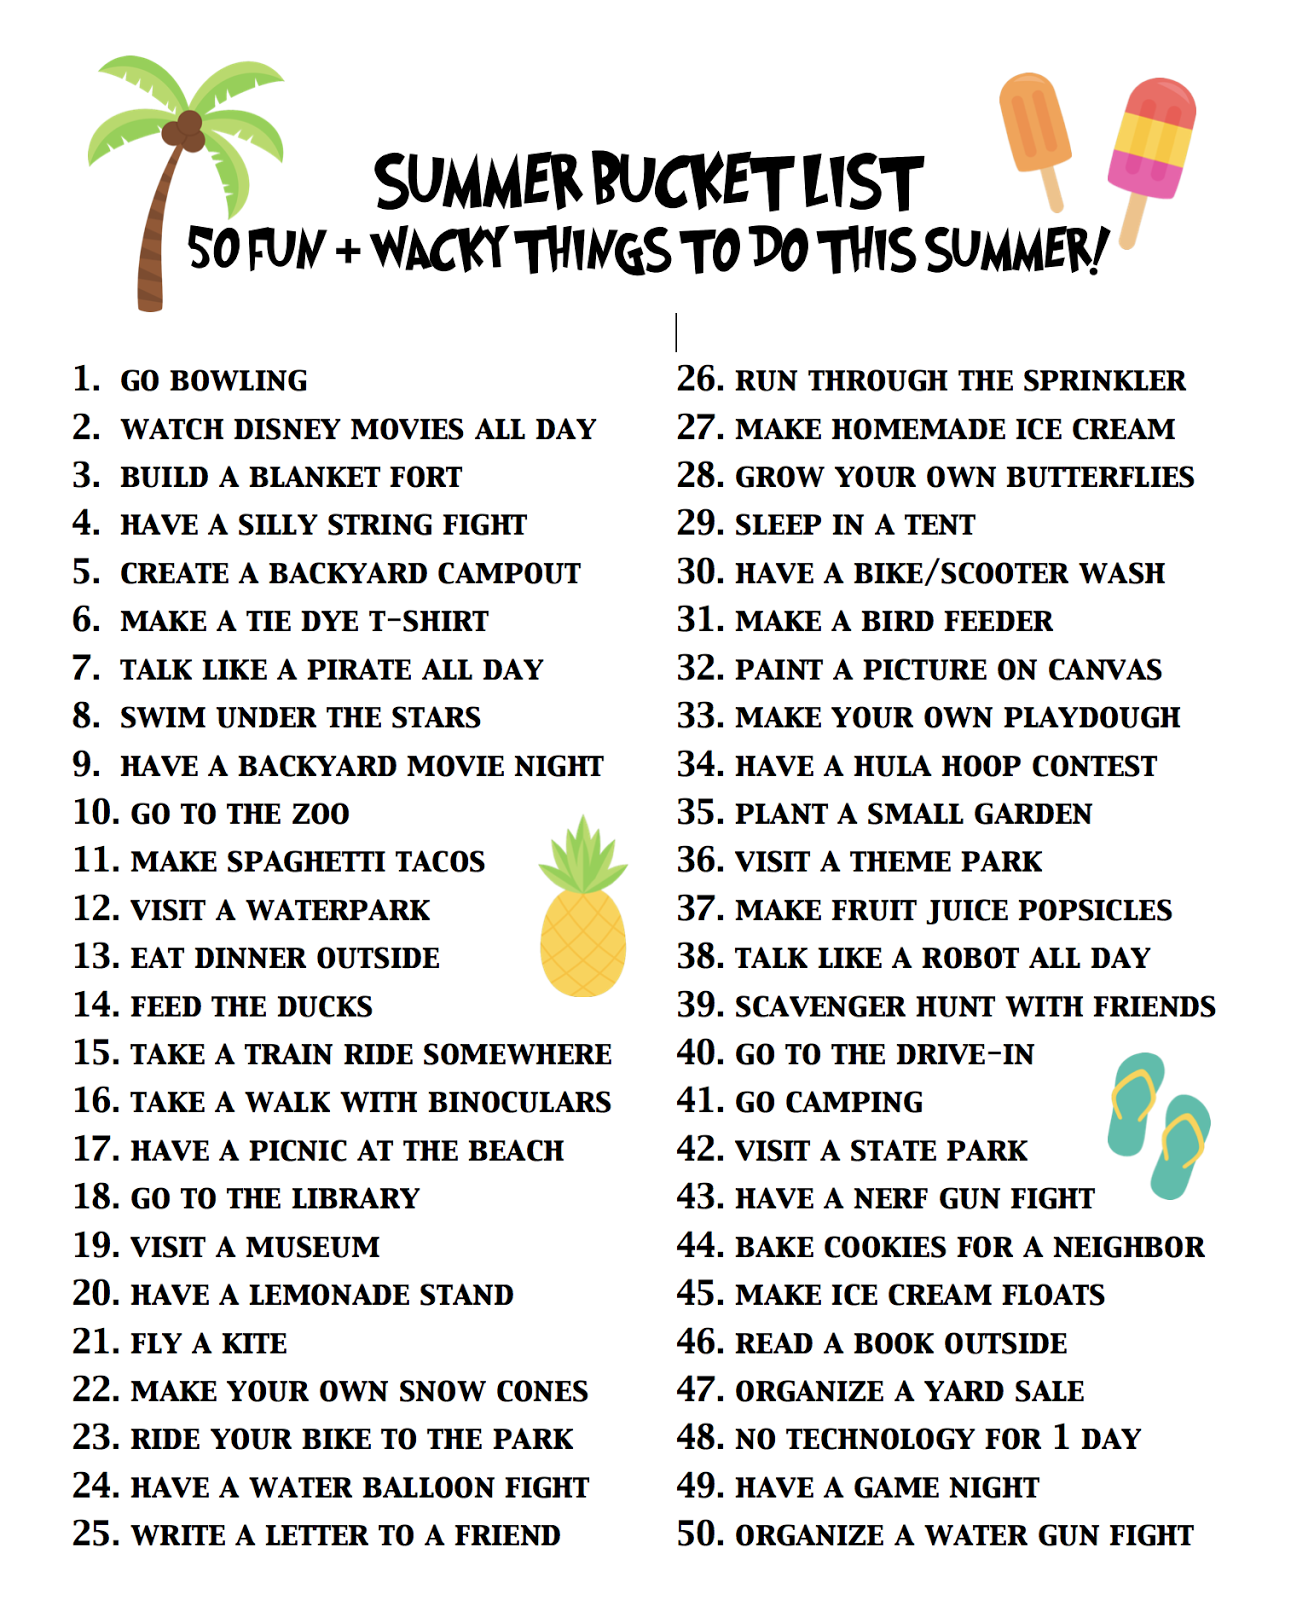 Summer Bucket List | FREE Printable - LAURA'S little PARTY